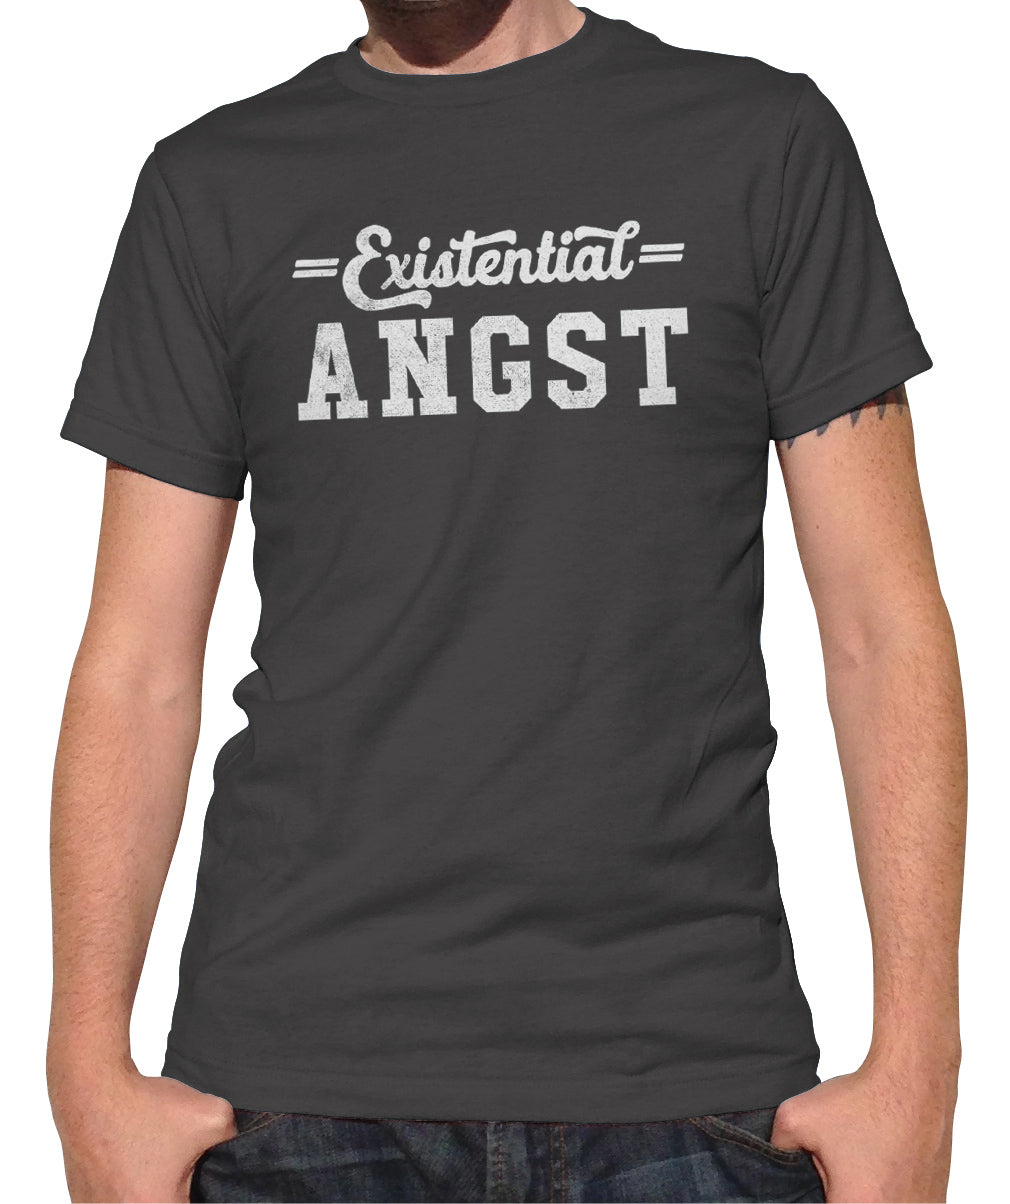 Men's Existential Angst T-Shirt - Funny Existentialism Shirt